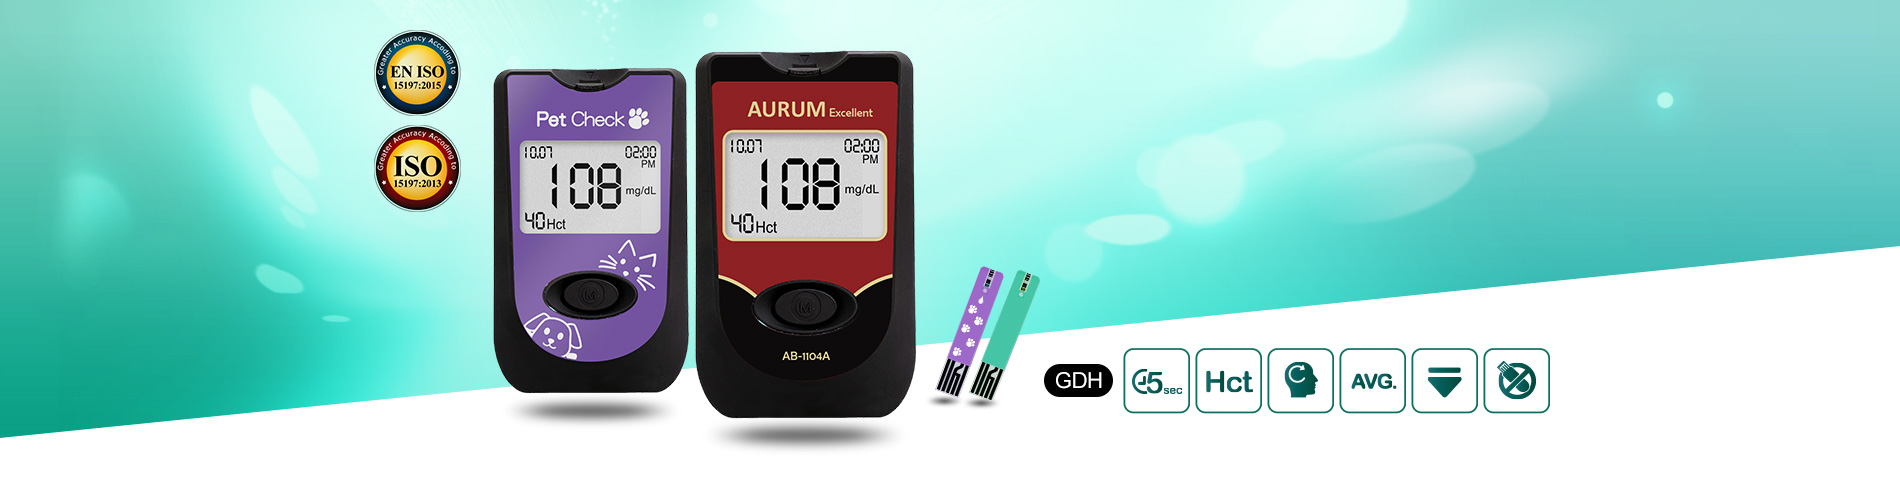 Quick Reaction & High Accuracy Glucometer & Hct Kit